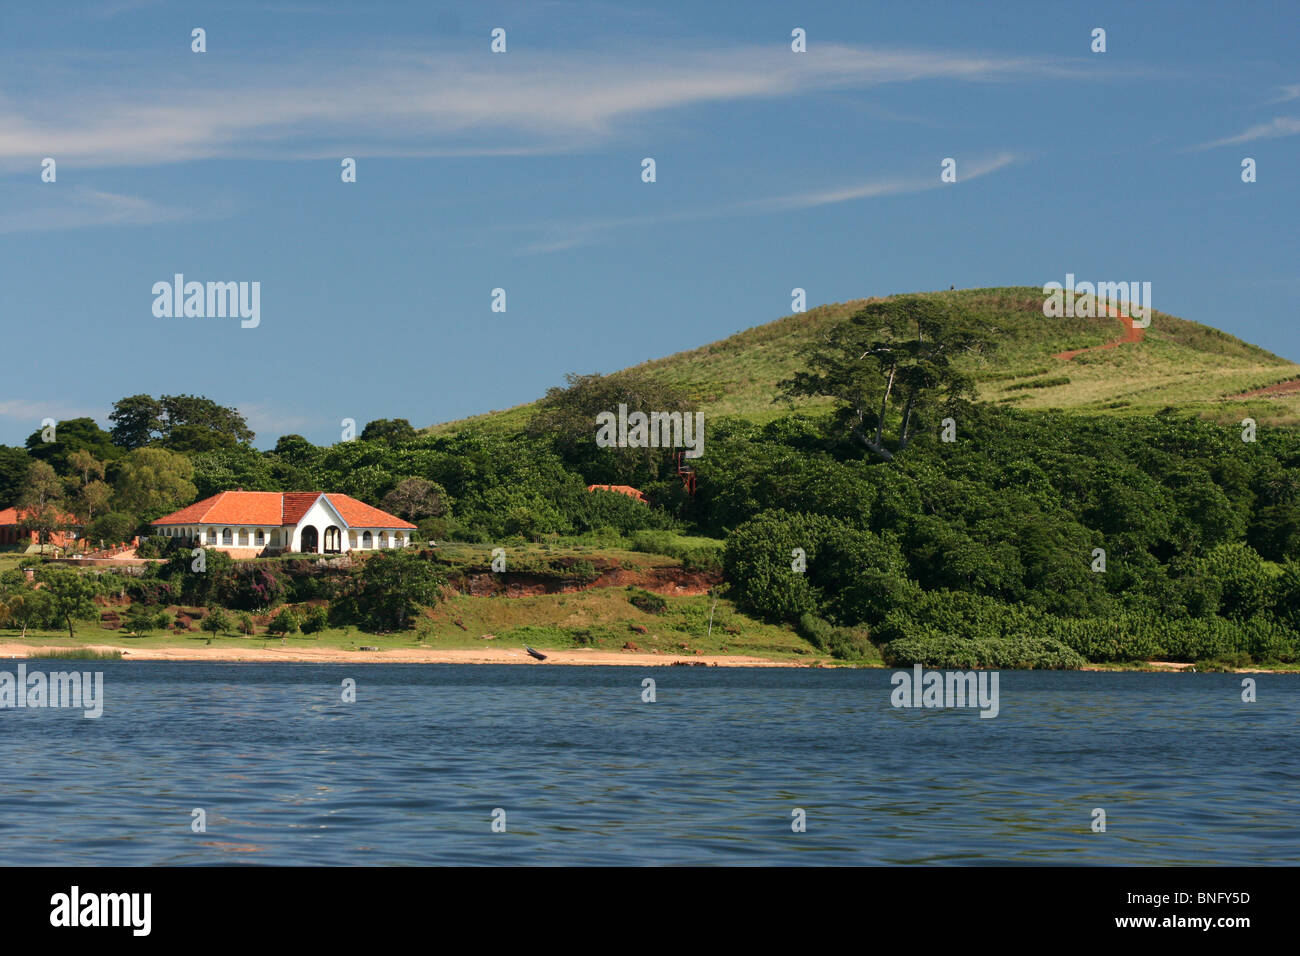 A lavish holiday house on an island in Lake Victoria Stock Photo